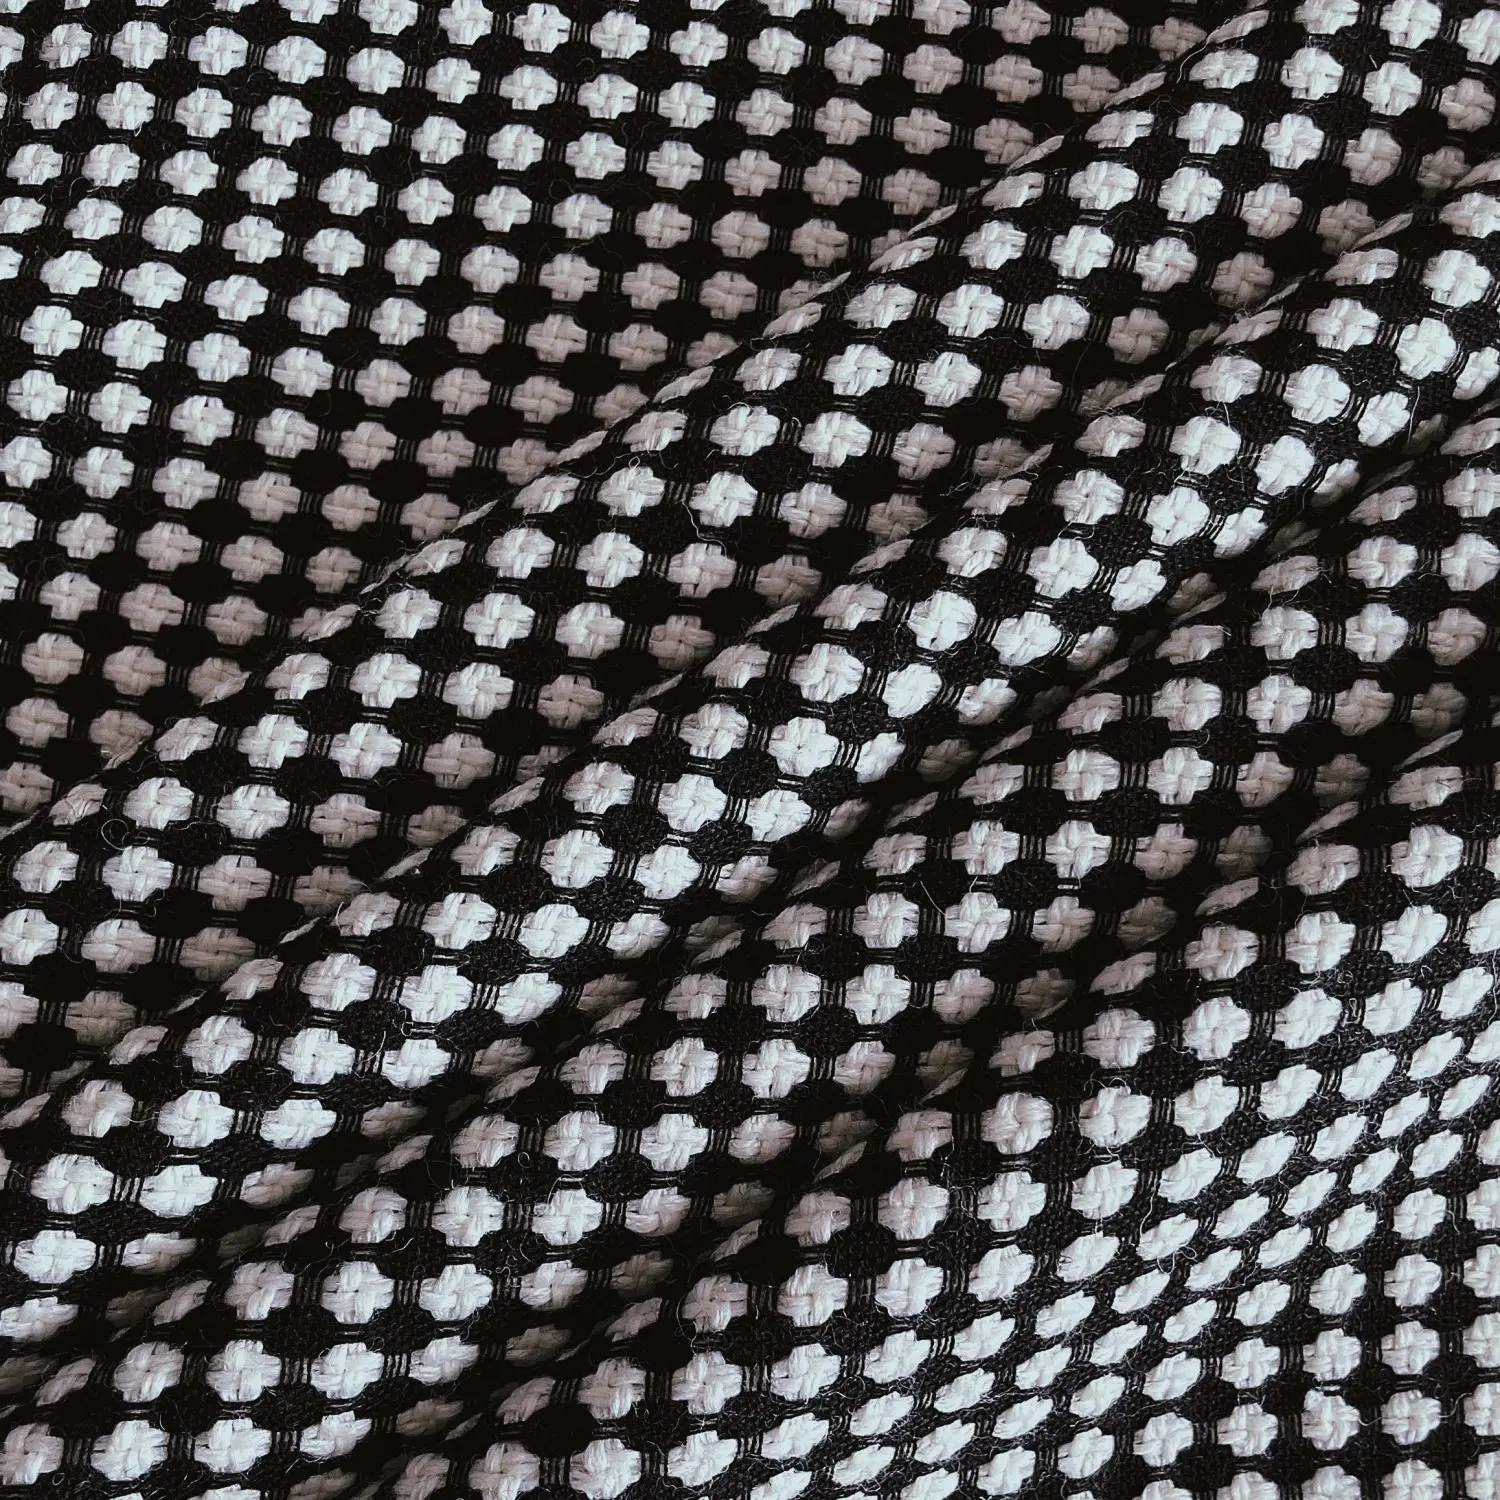 Hot Selling Wholesale Polyester, Cotton Tweed Check Herringbone Fabric Wool Cotton Yarn Polyester Fancy Tweed Fabric/